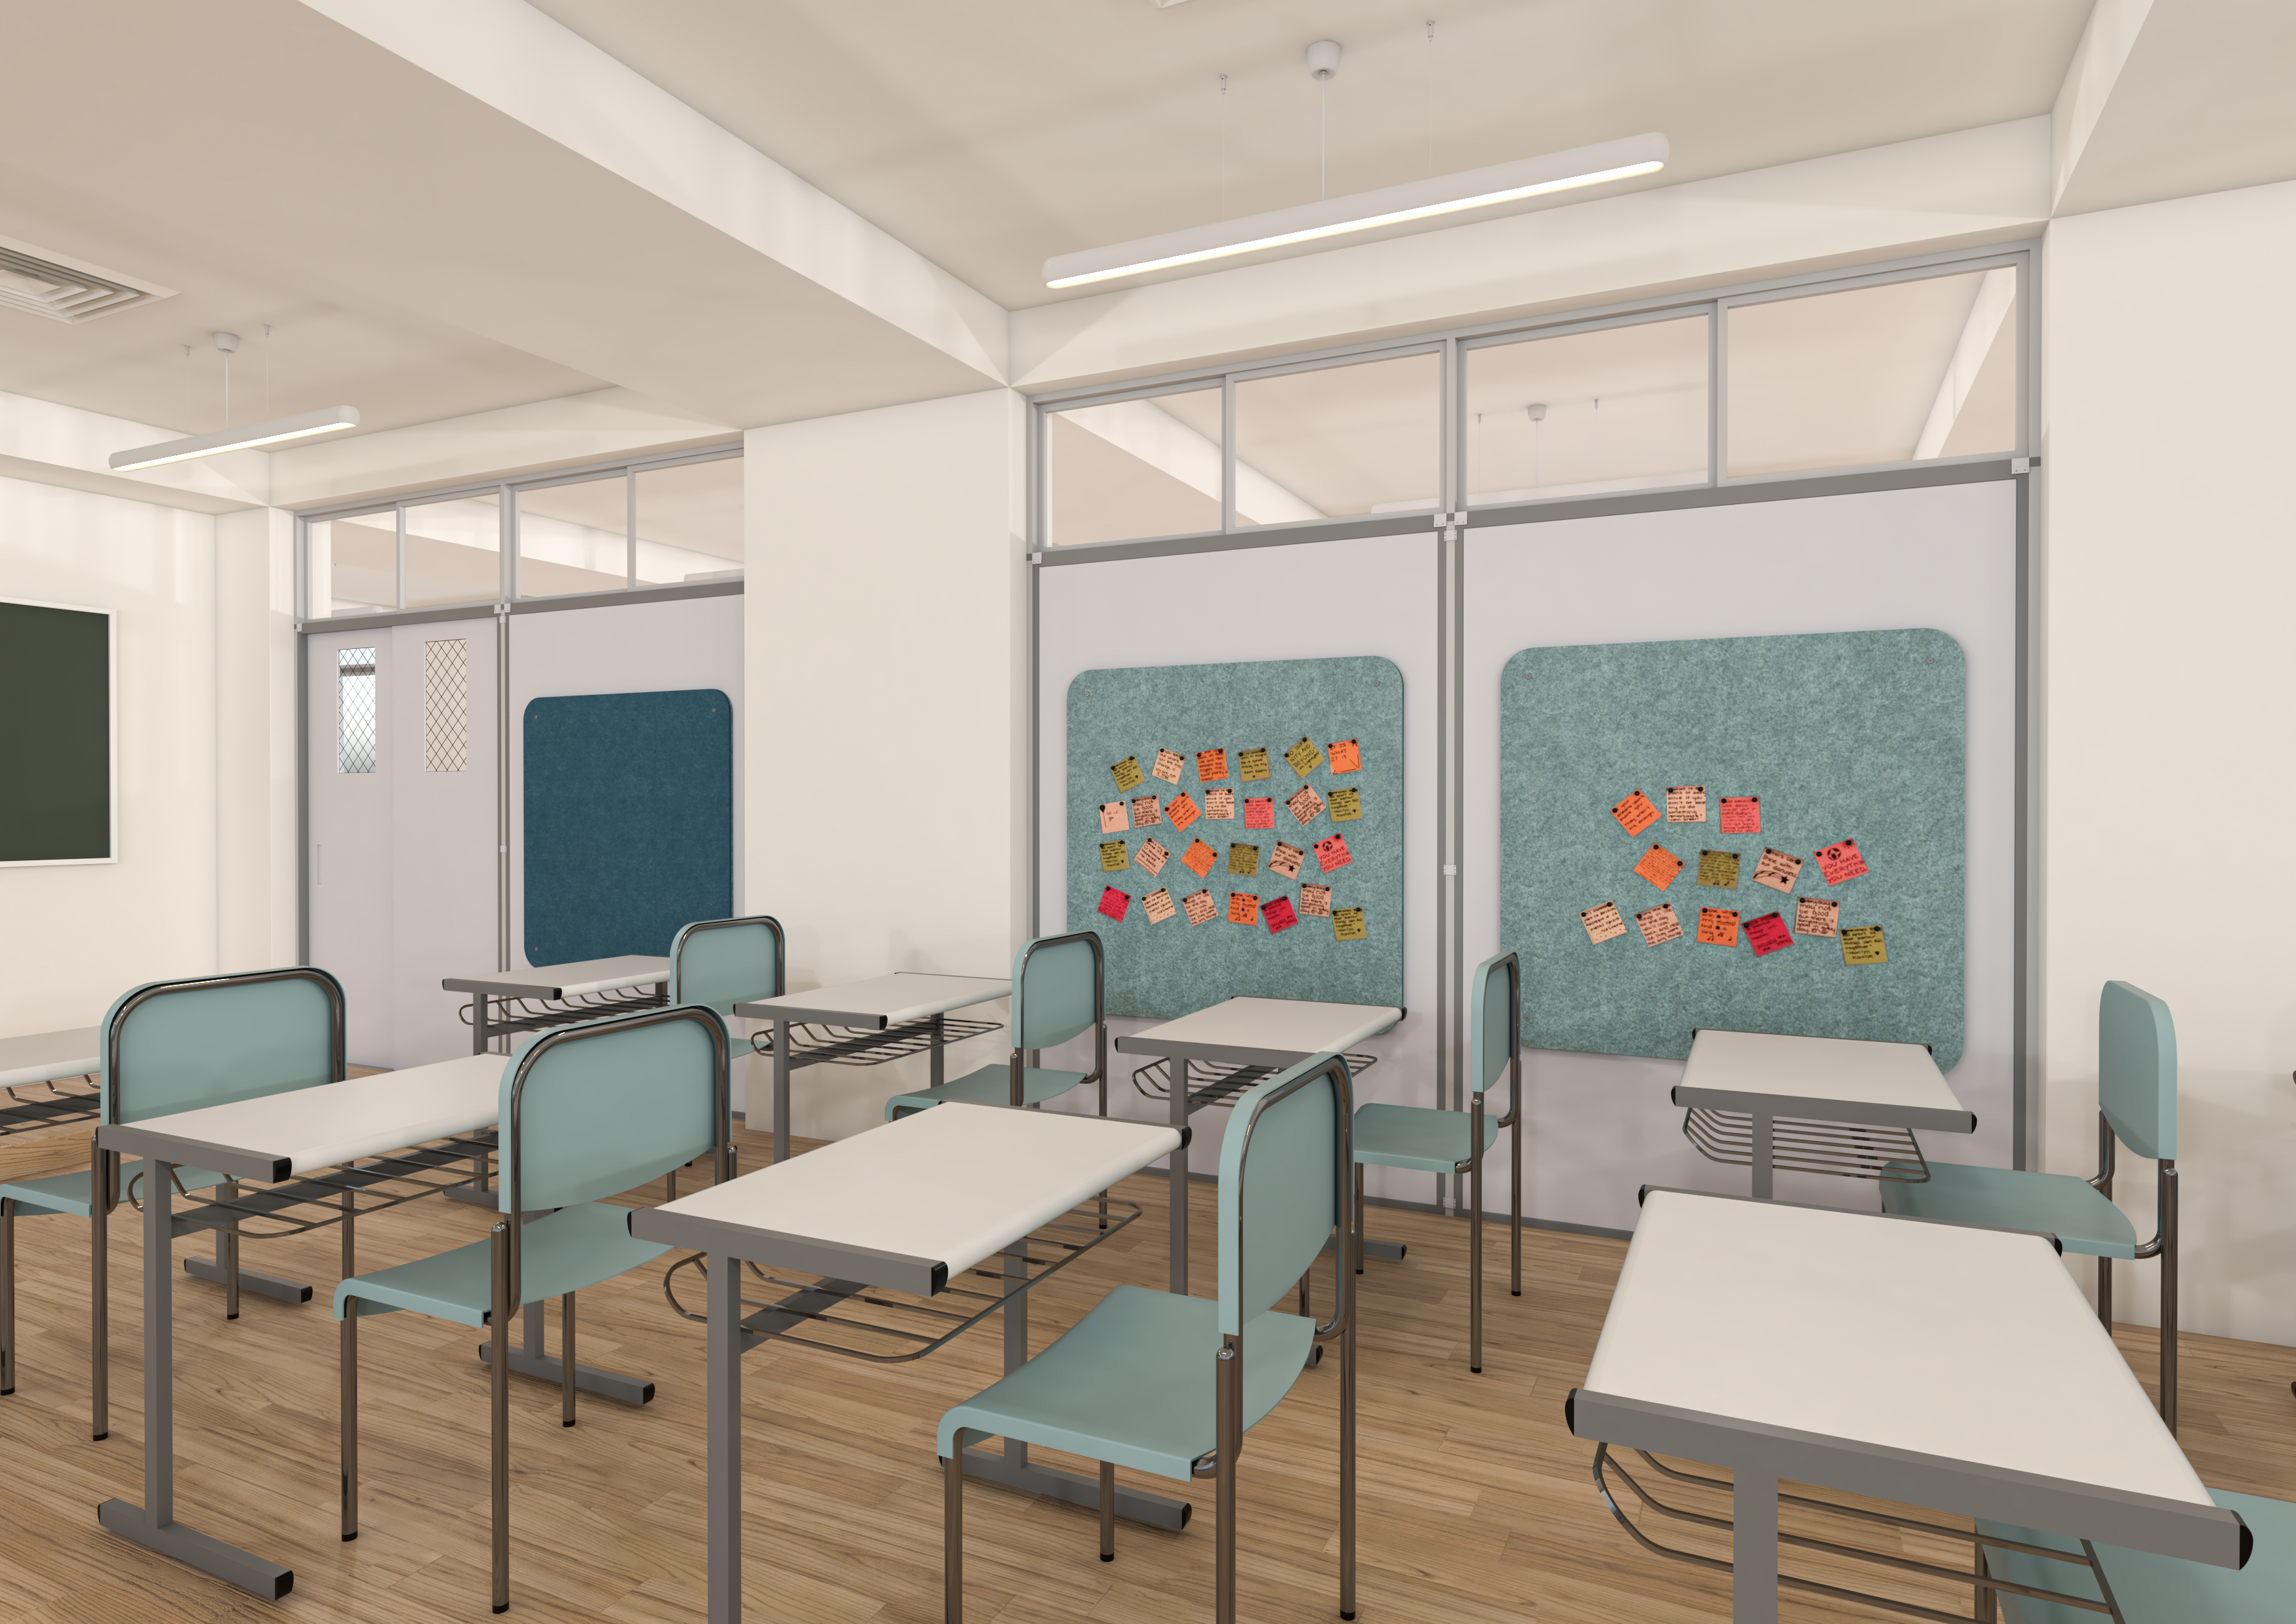 Classroom with colourful cozy sound-absorbing panels on the wall